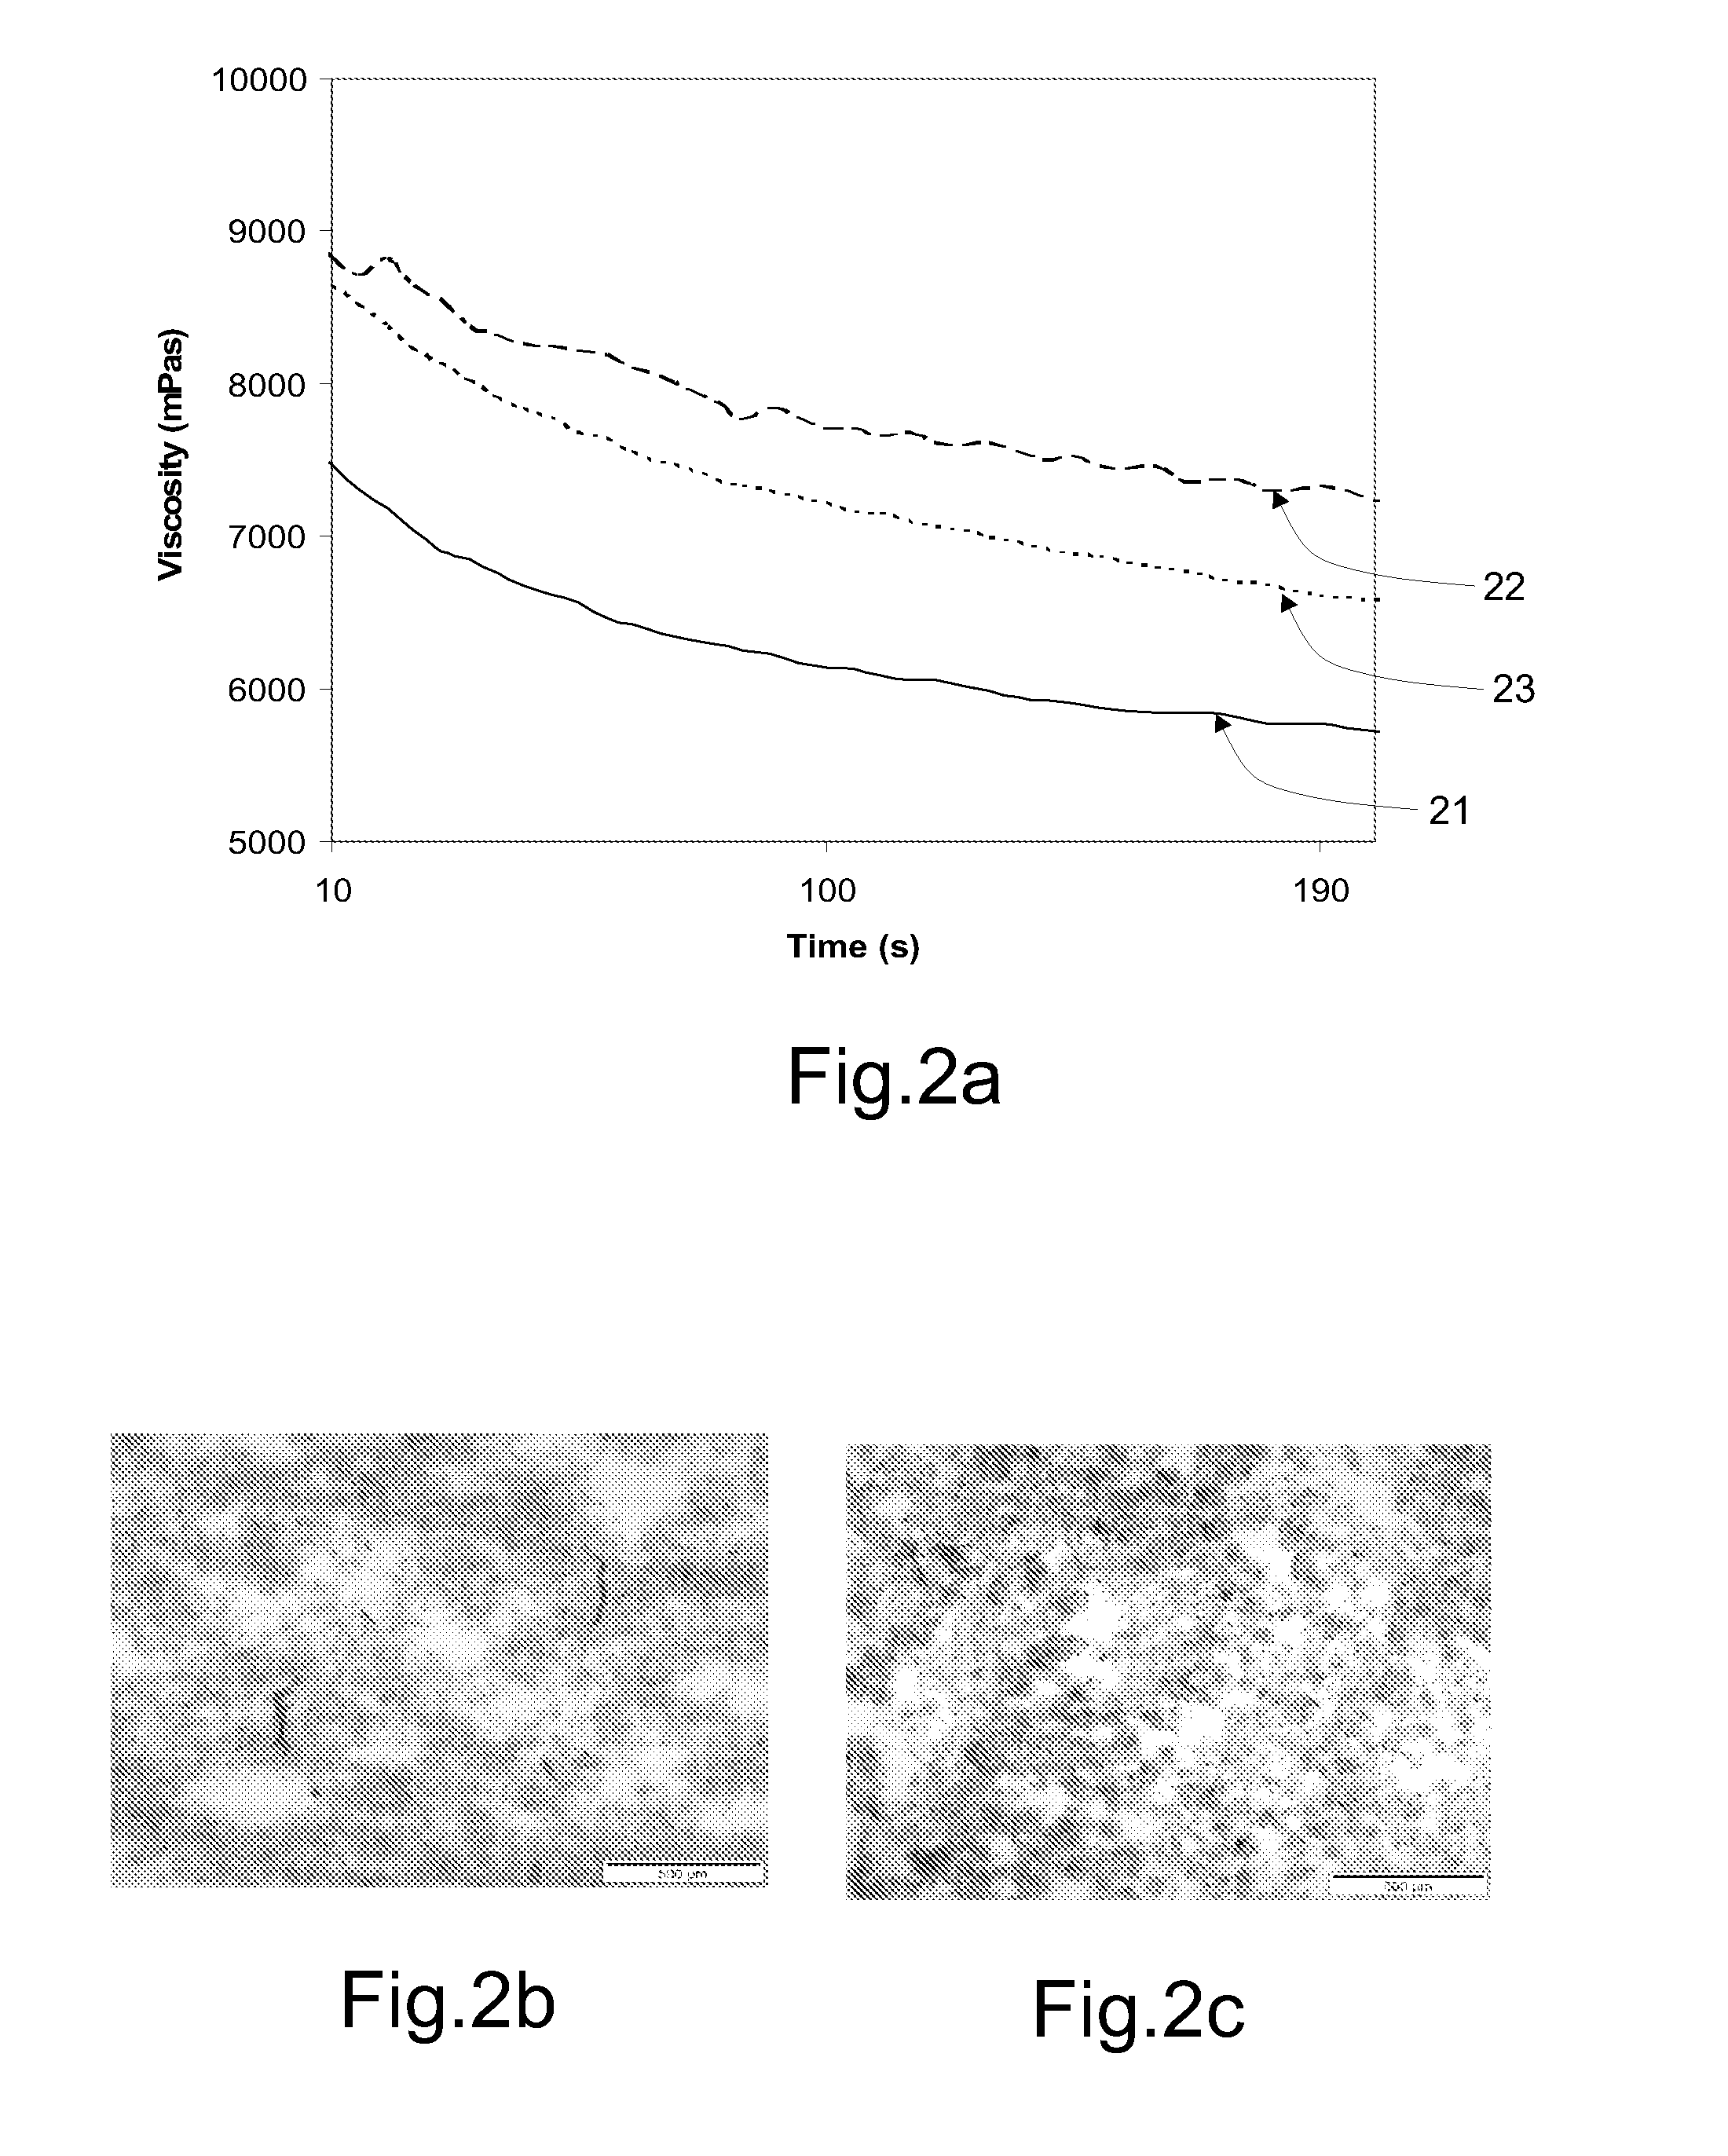 Method for manufacturing nanofibrillated cellulose pulp and use of the pulp in paper manufacturing or in nanofibrillated cellulose composites